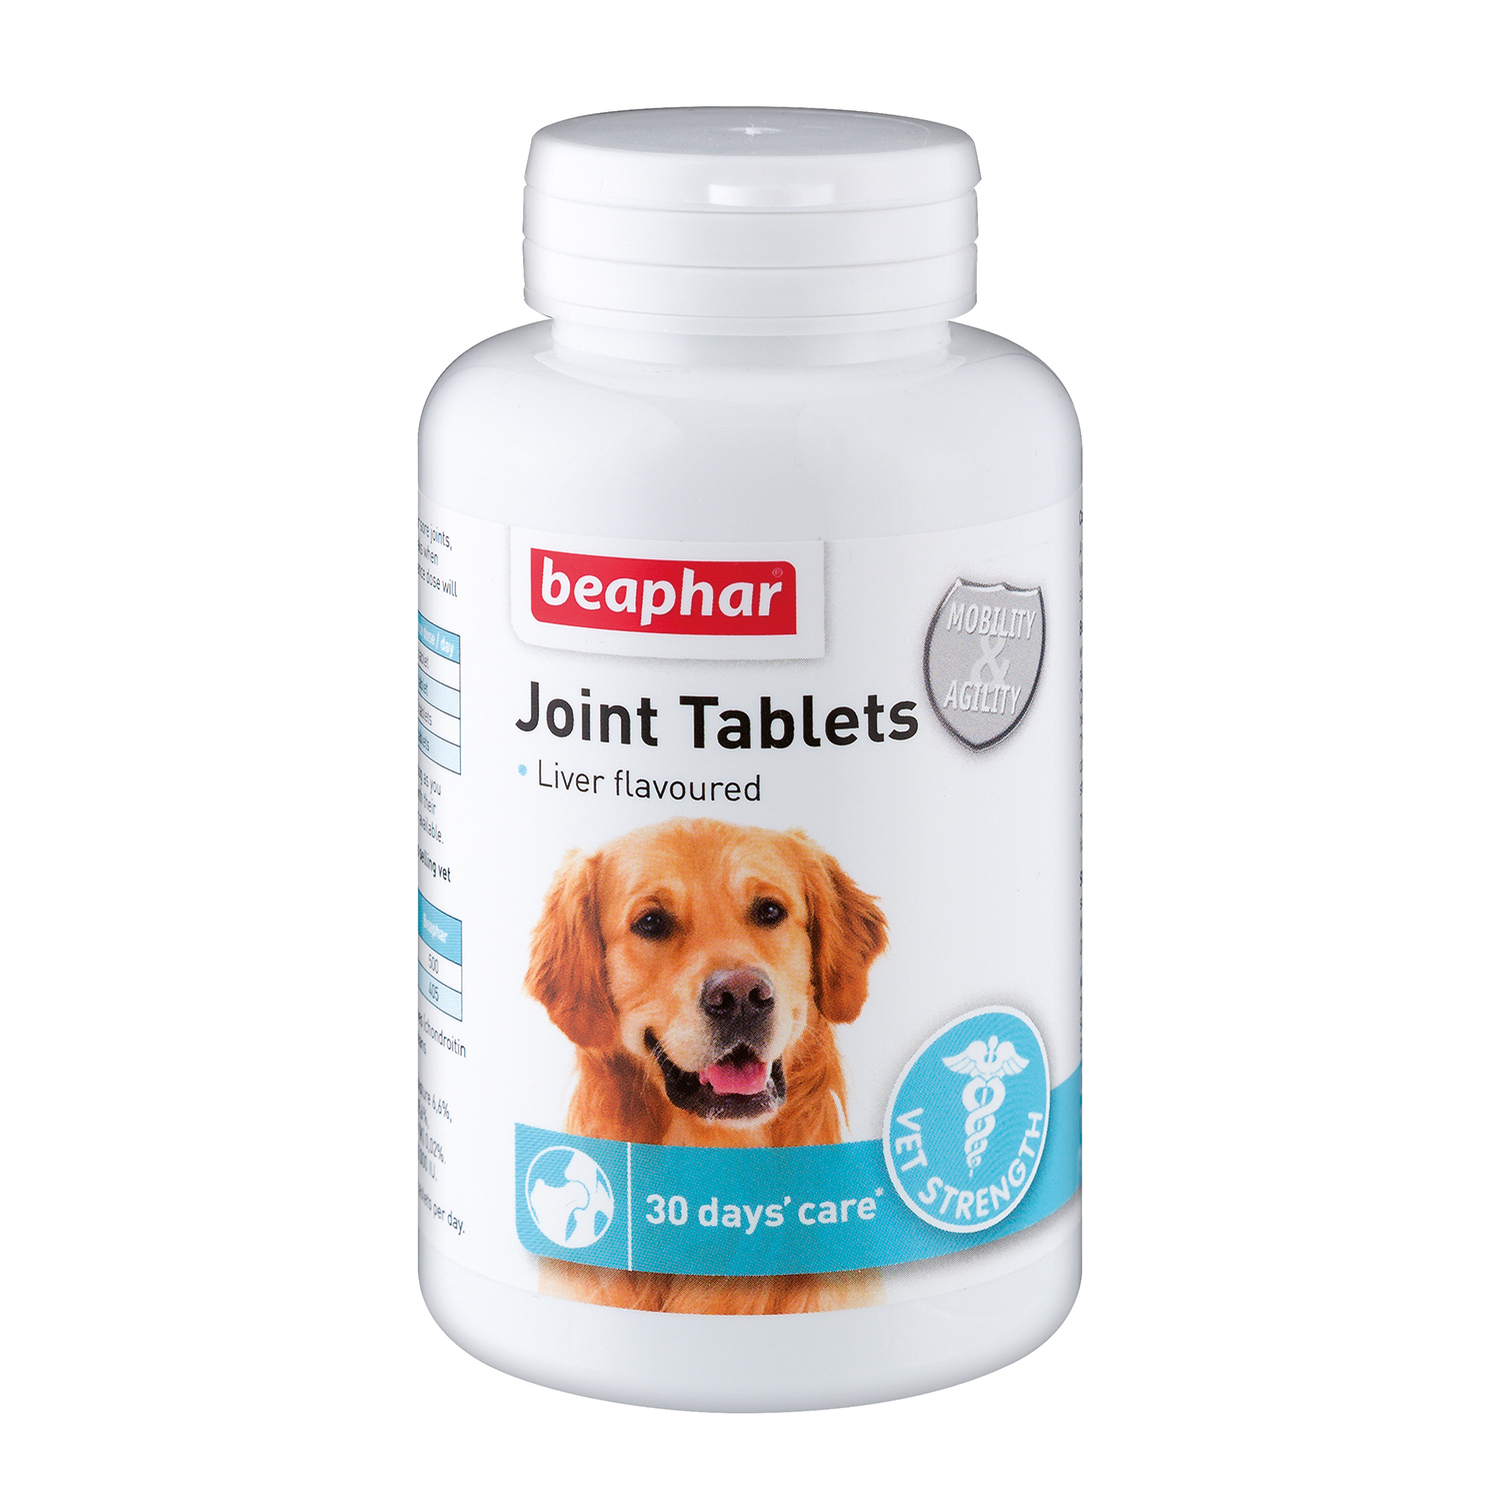 Beaphar Liver Flavoured Joint Tablets for Dogs Image